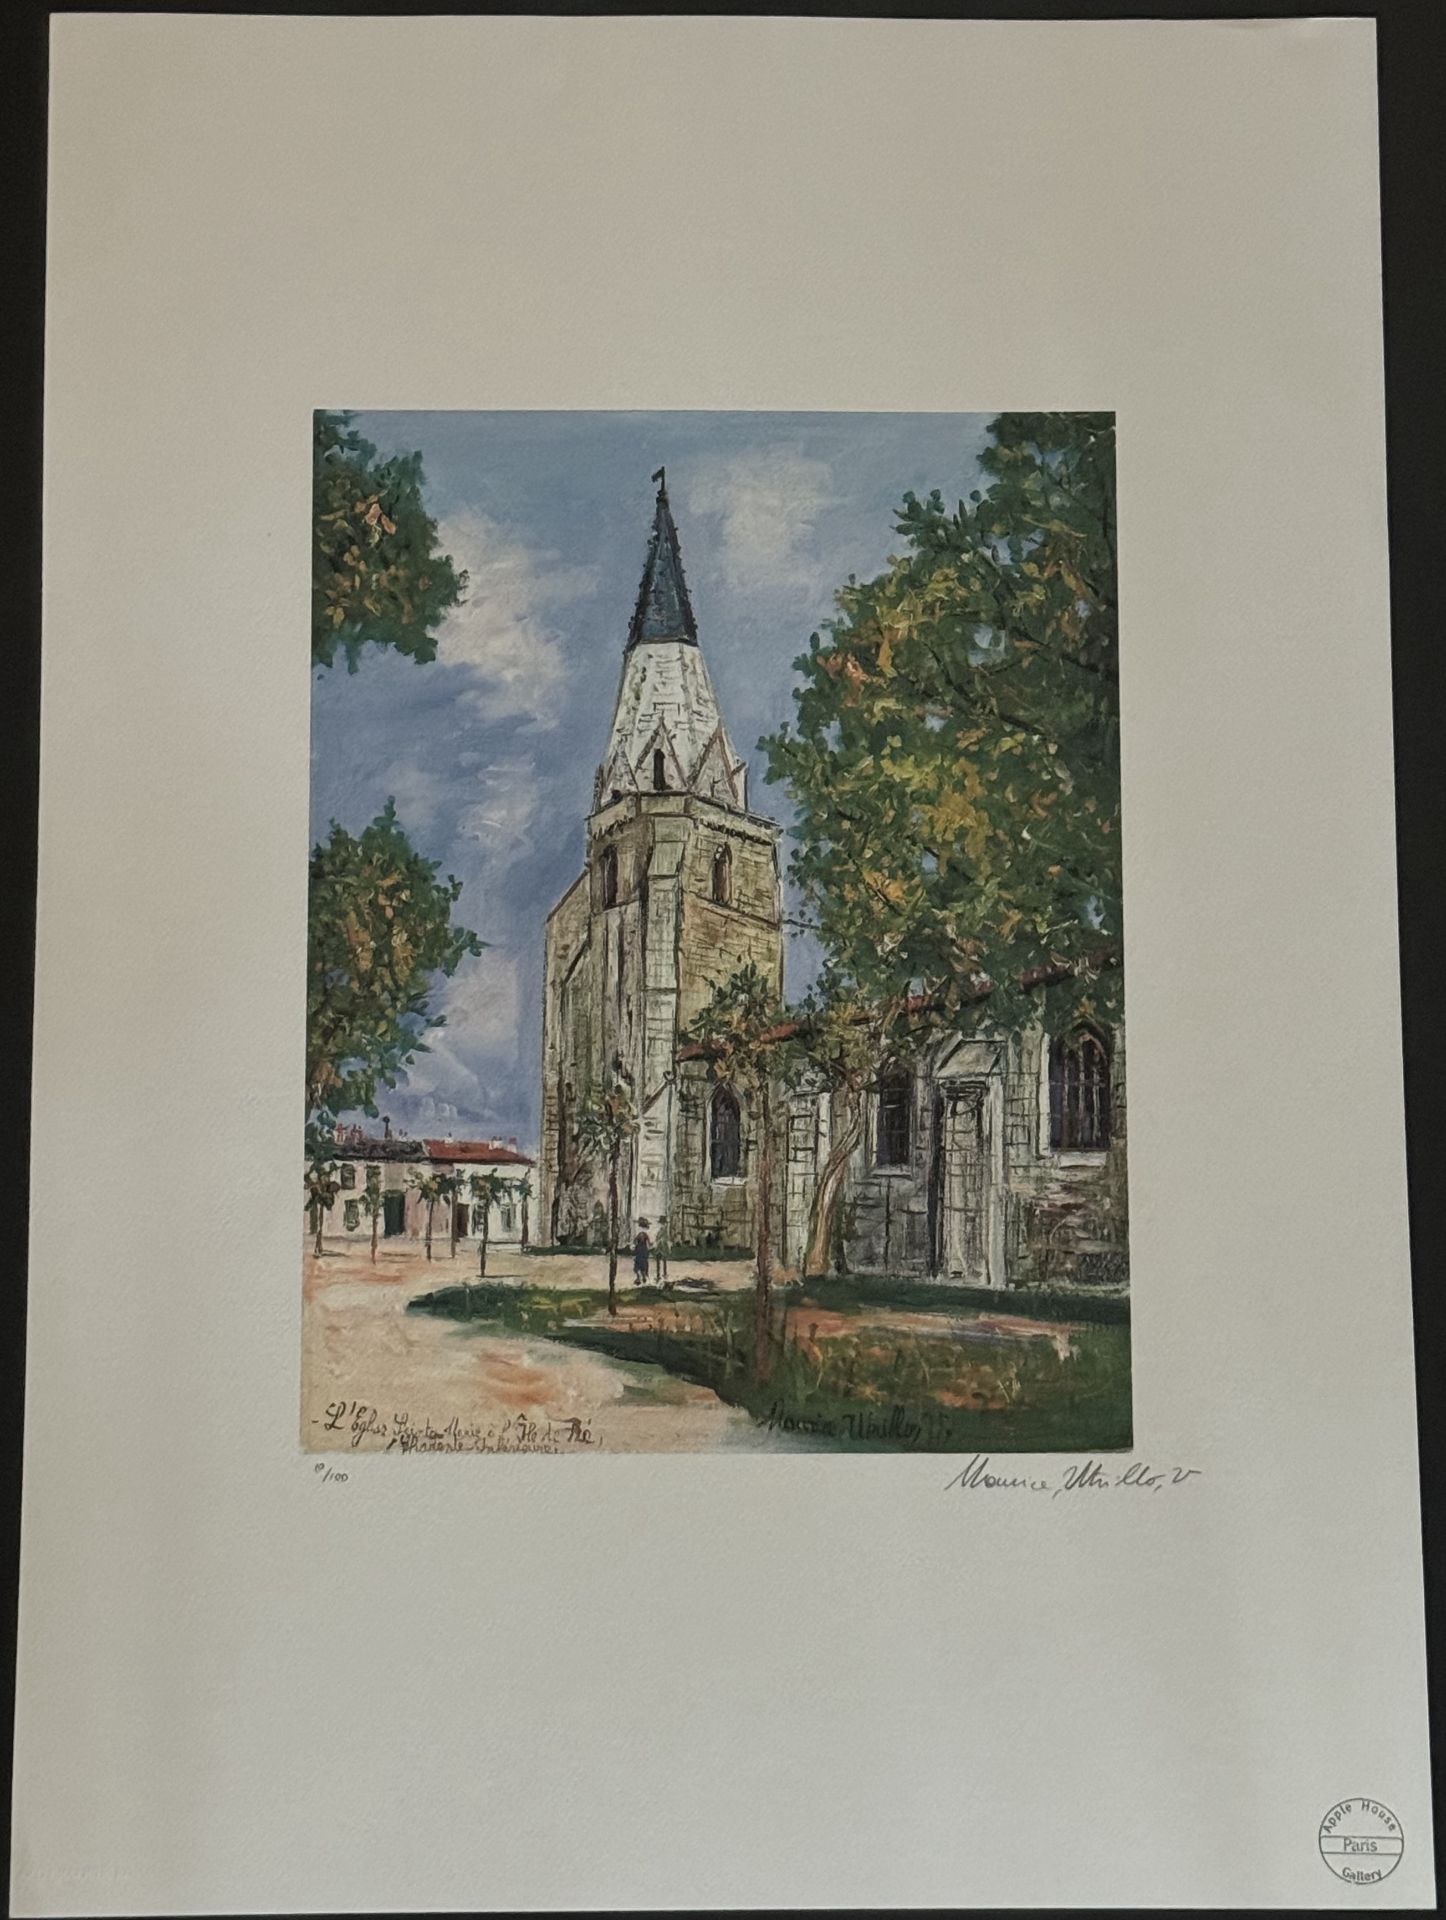 Maurice Utrillo offset lithograph pencil signed hand numbered